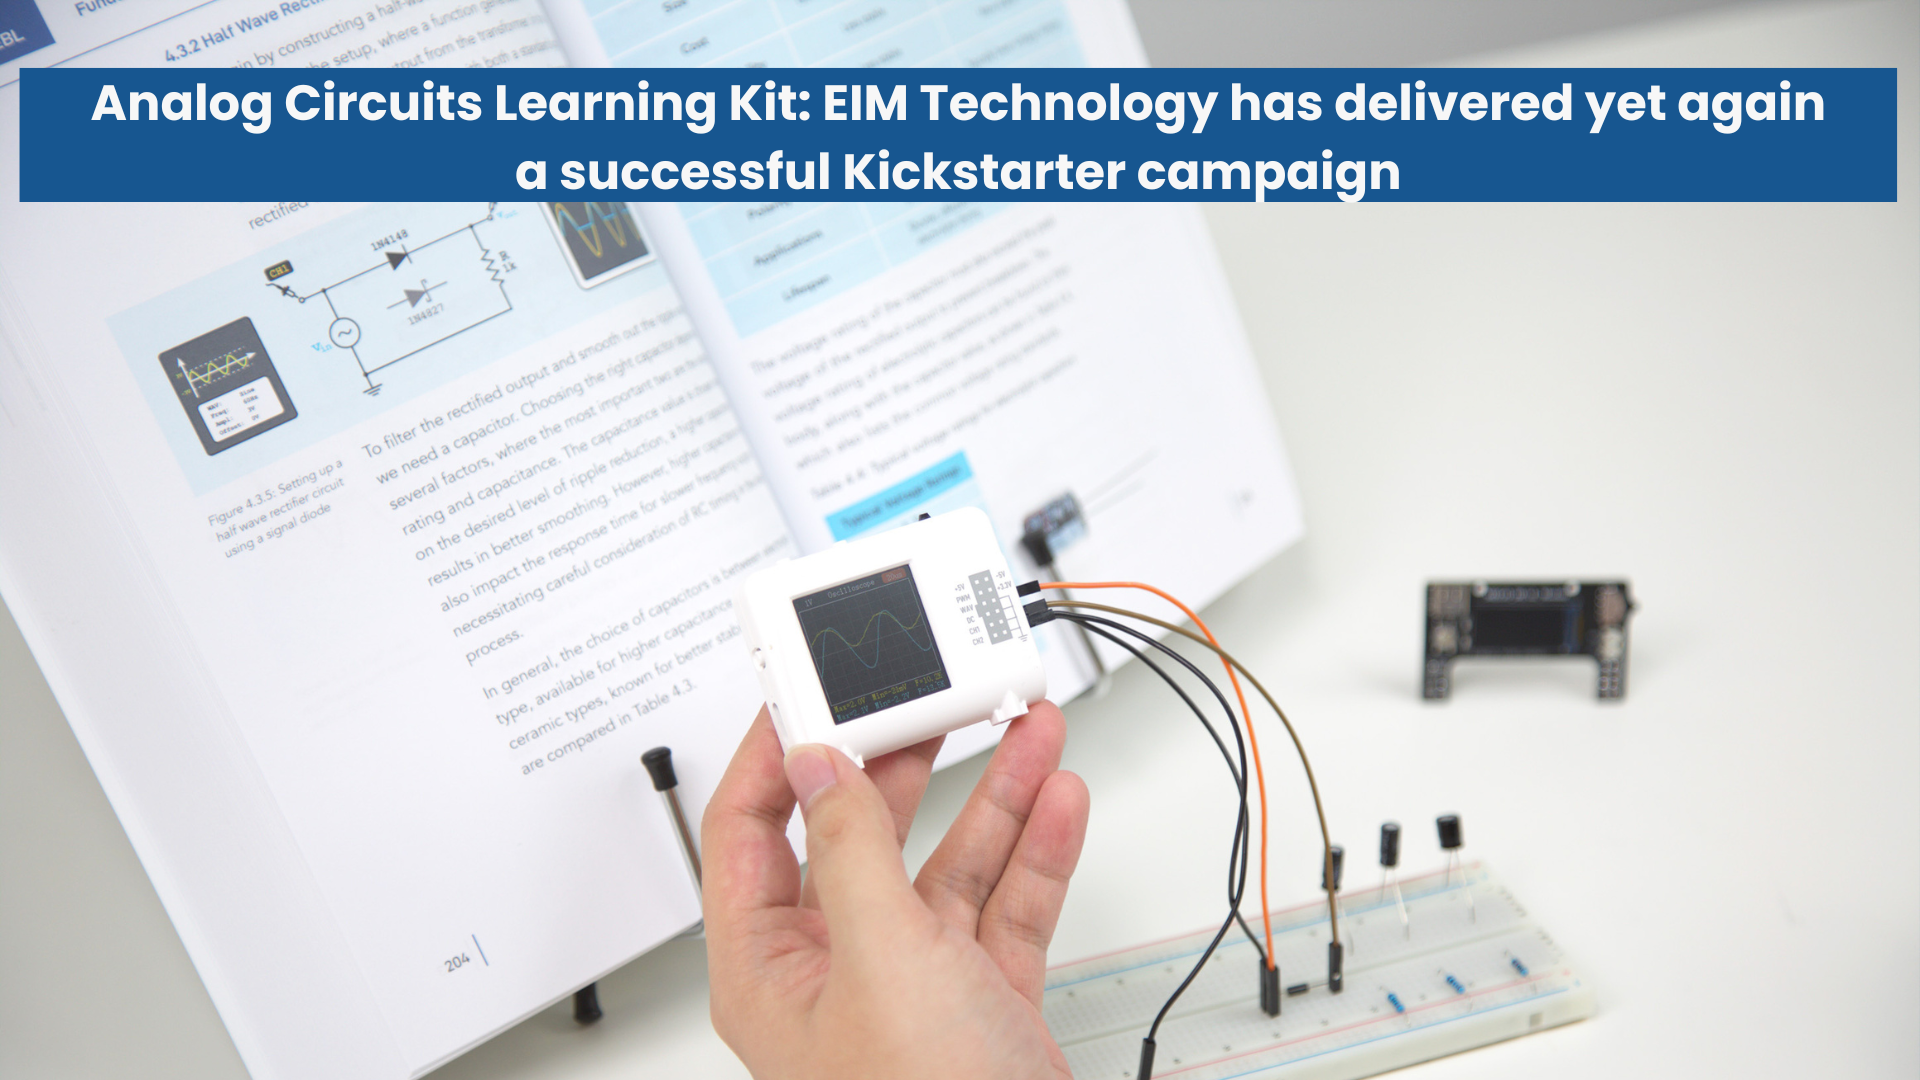 Analog Circuits Learning Kit: EIM Technology has delivered yet again a successful Kickstarter campaign